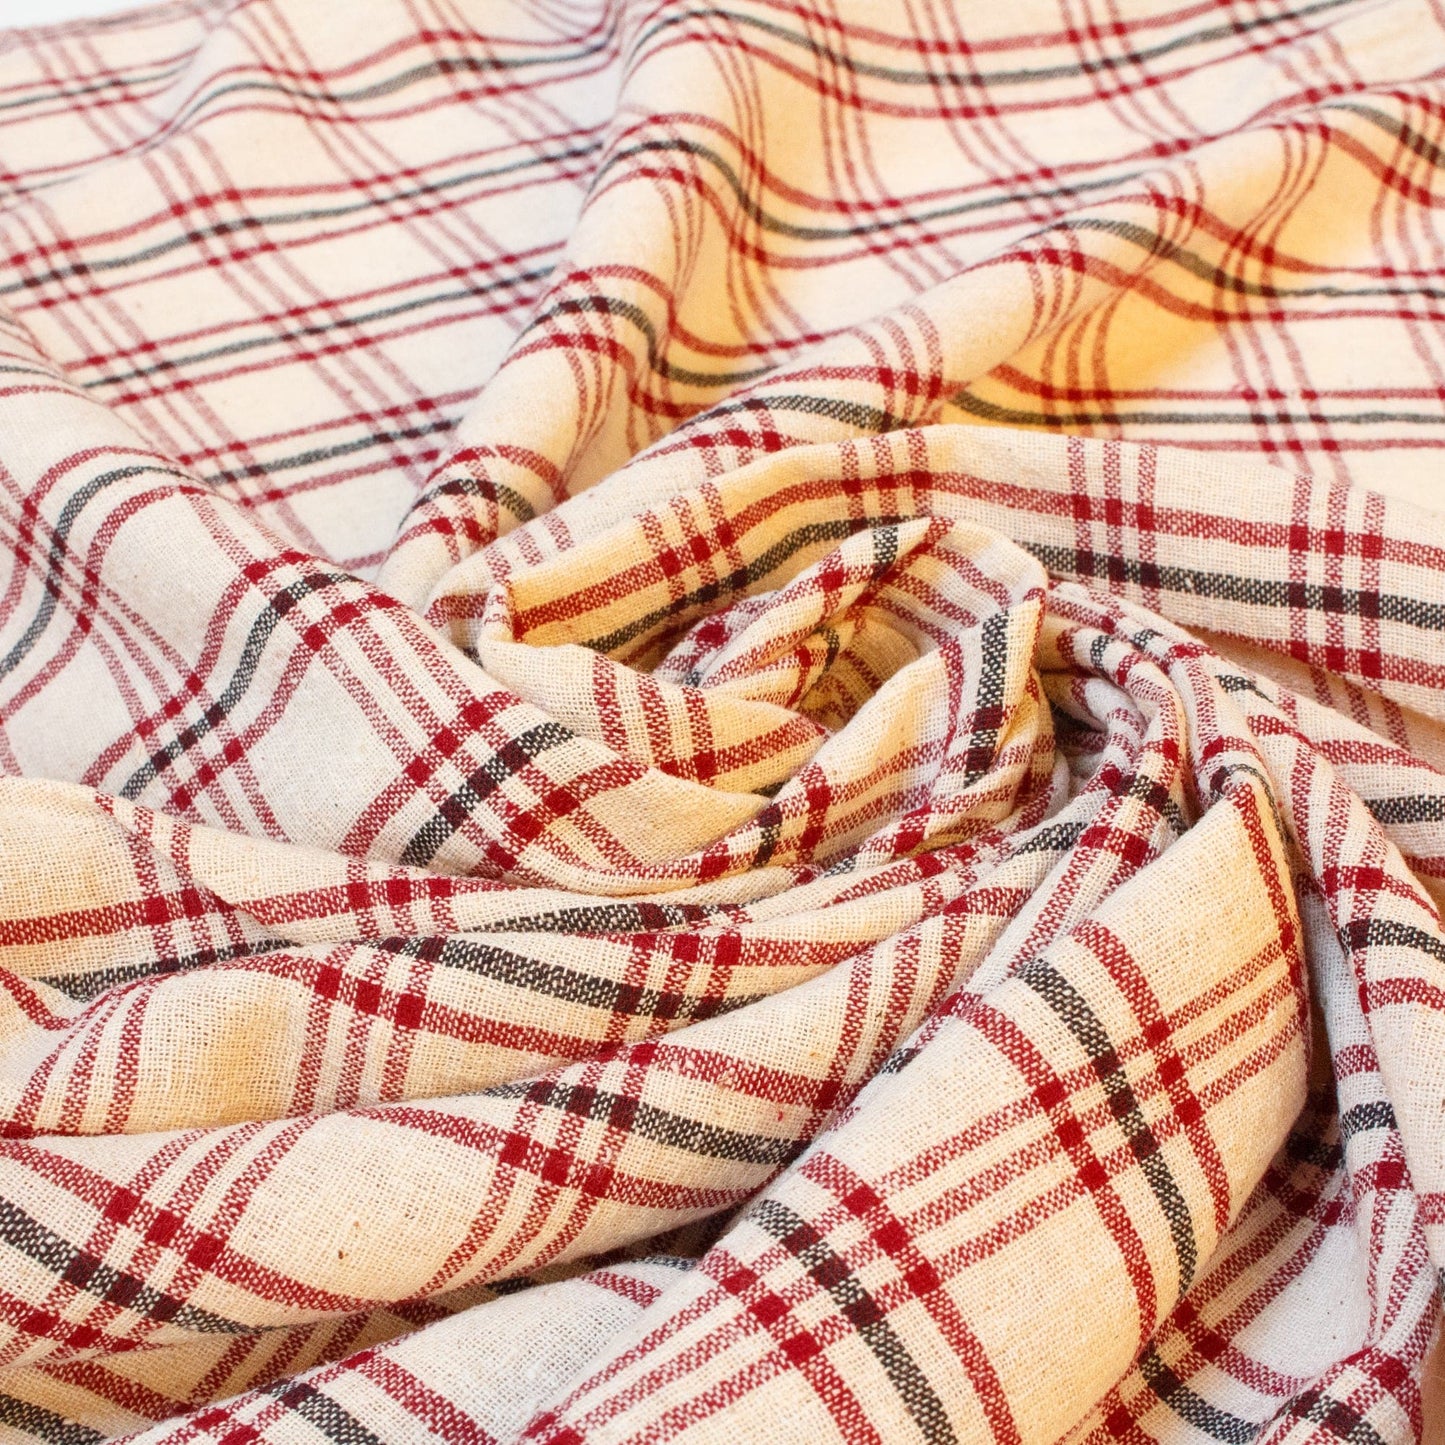 Indian Kotpad Cotton Fabric Cream with Burgundy and Black Check